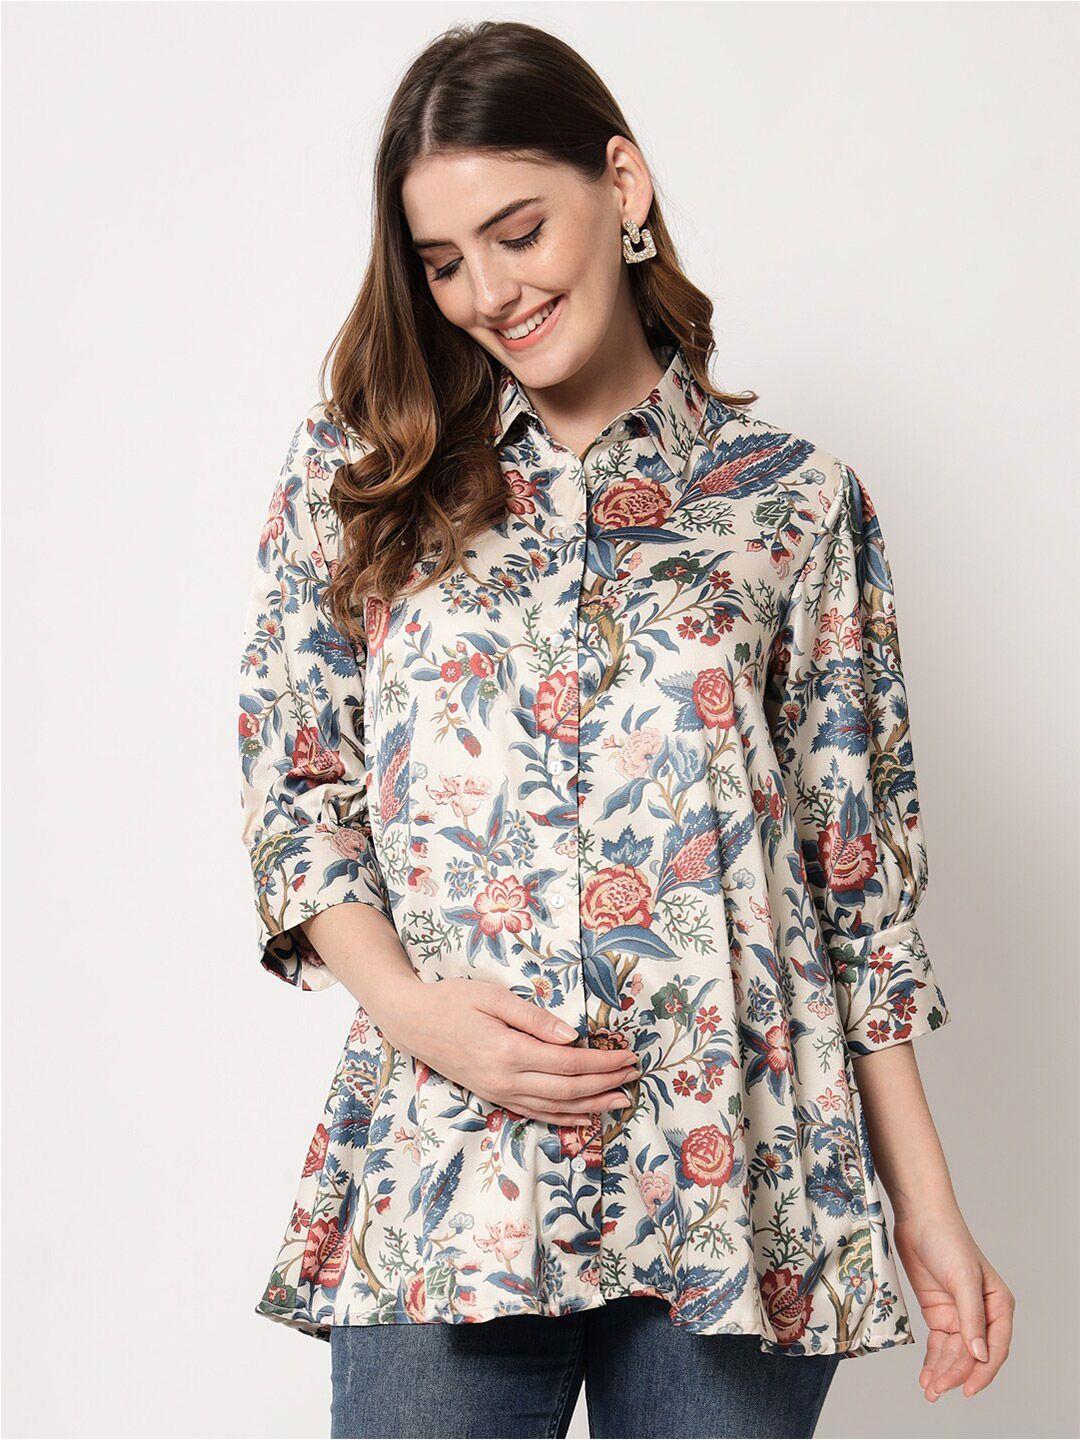 angloindu-floral-print-shirt-style-maternity-top